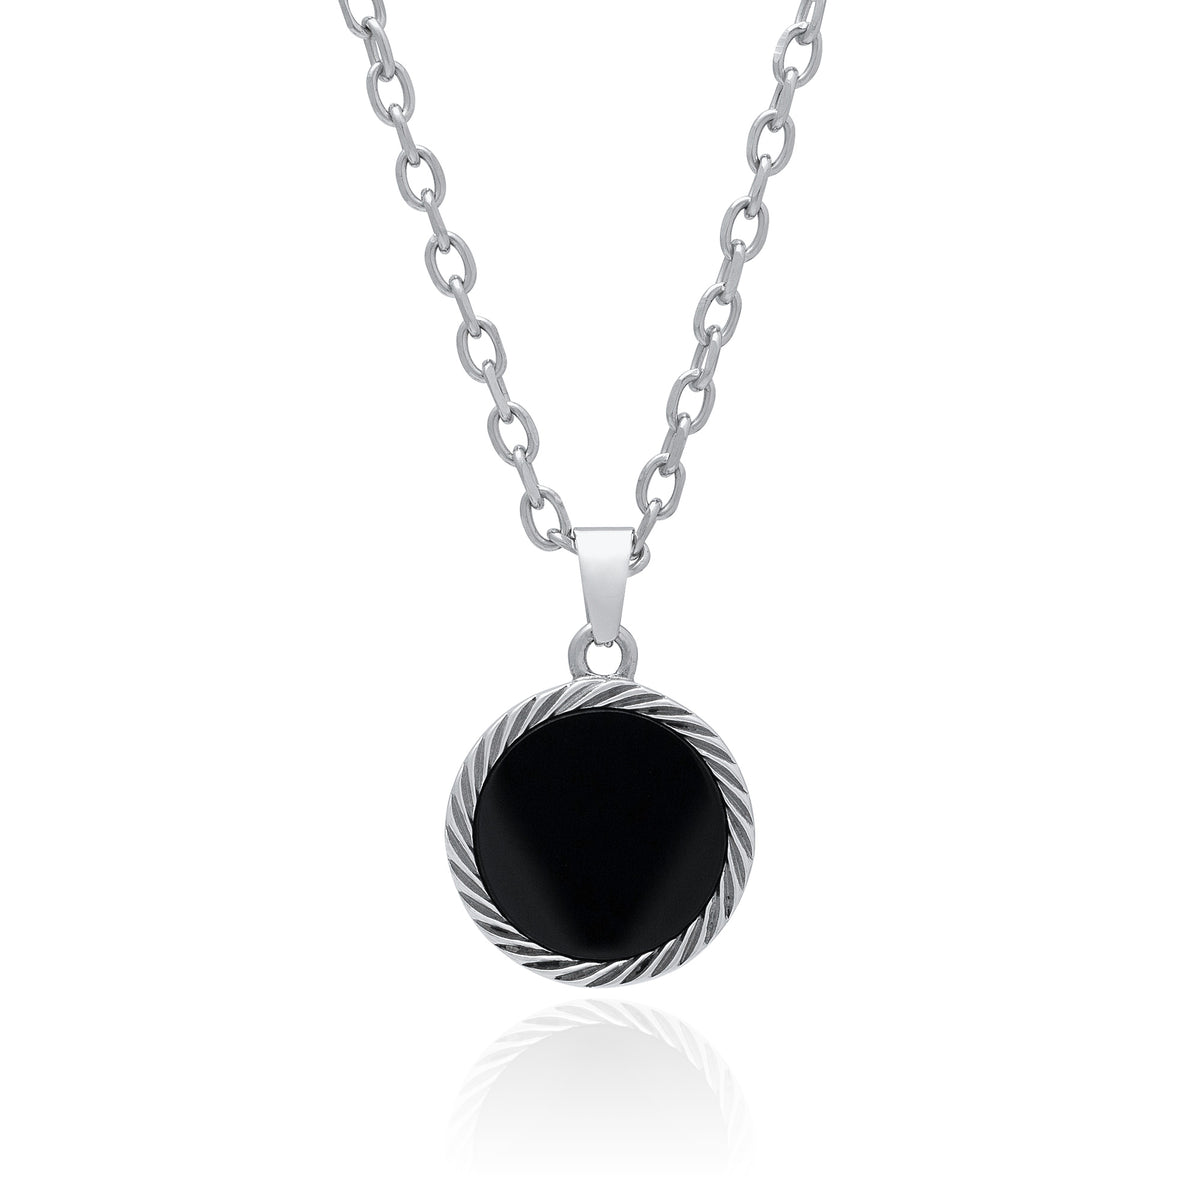 Silver Medallion Onyx Pendant on white background hanging from necklace